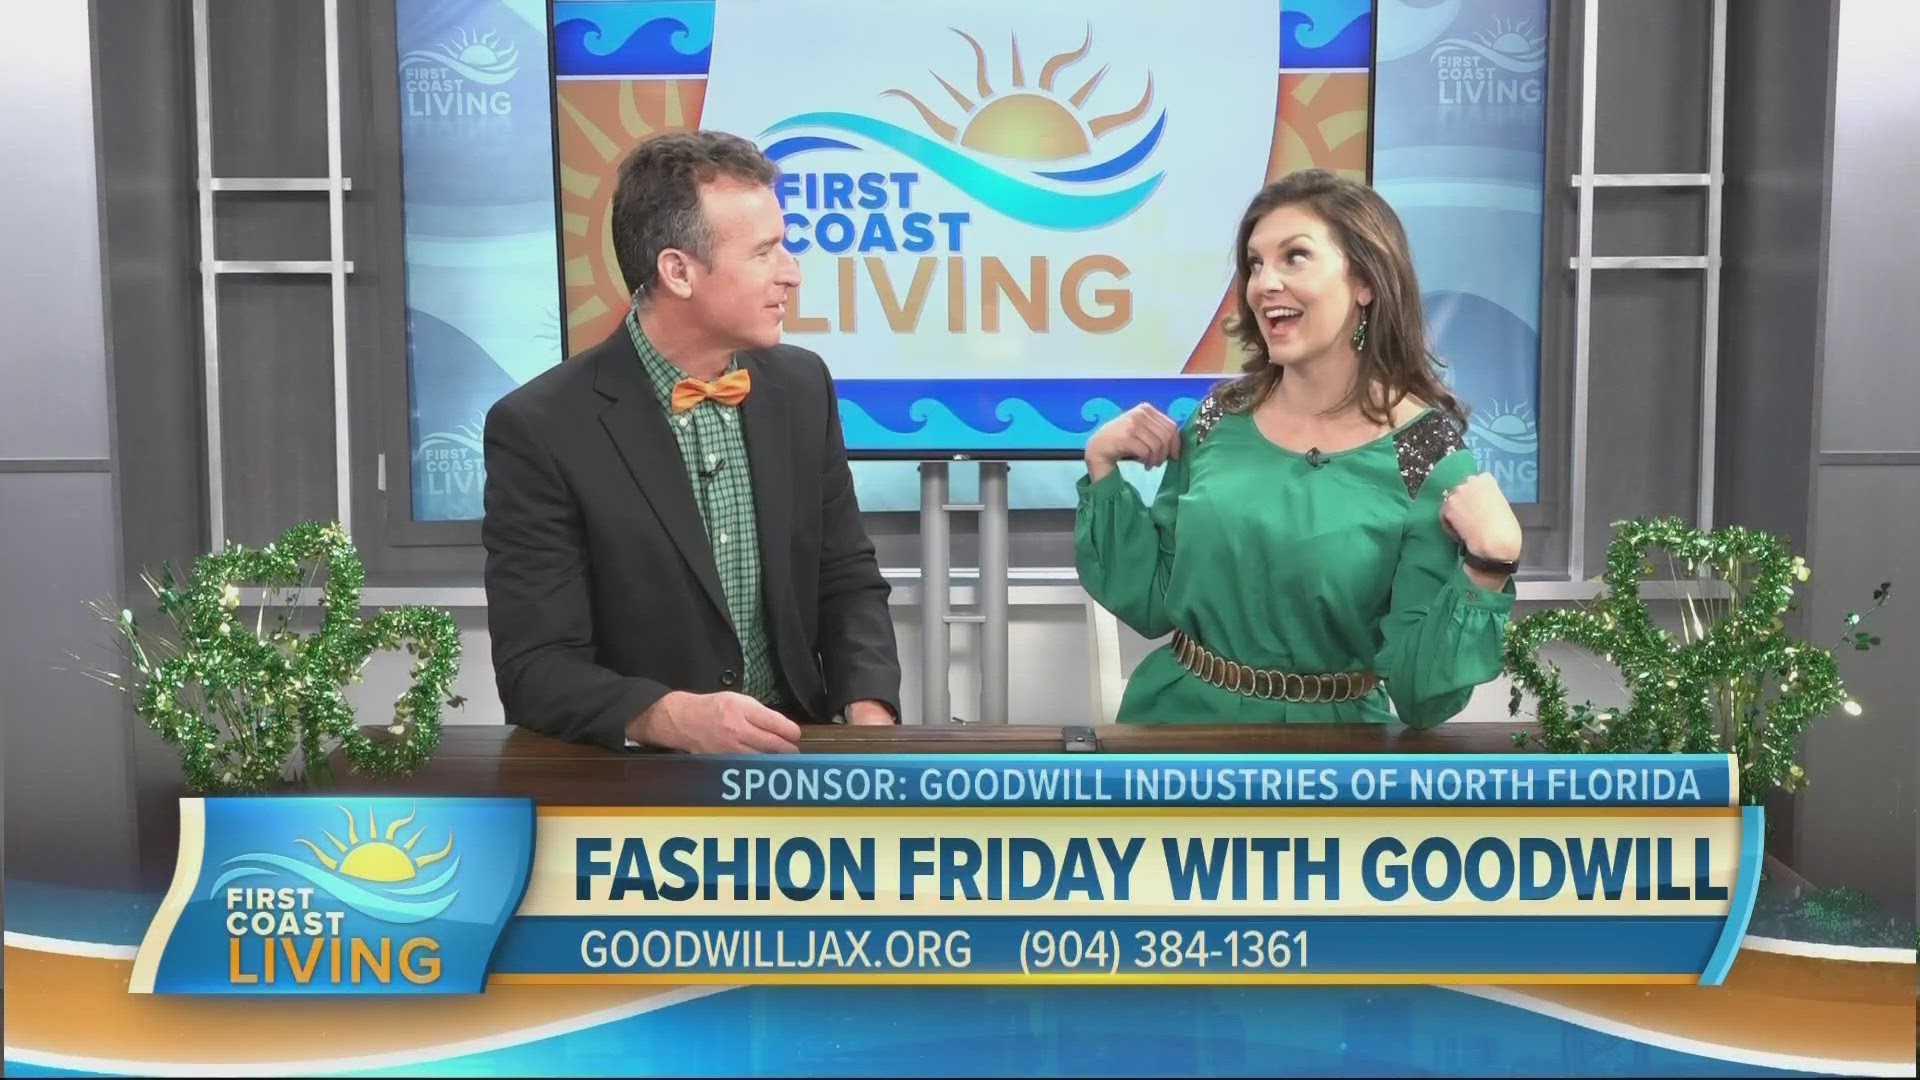 Don't get pinched this year! Goodwill has loads of green clothing and the racks are color-coded for speedy shopping.